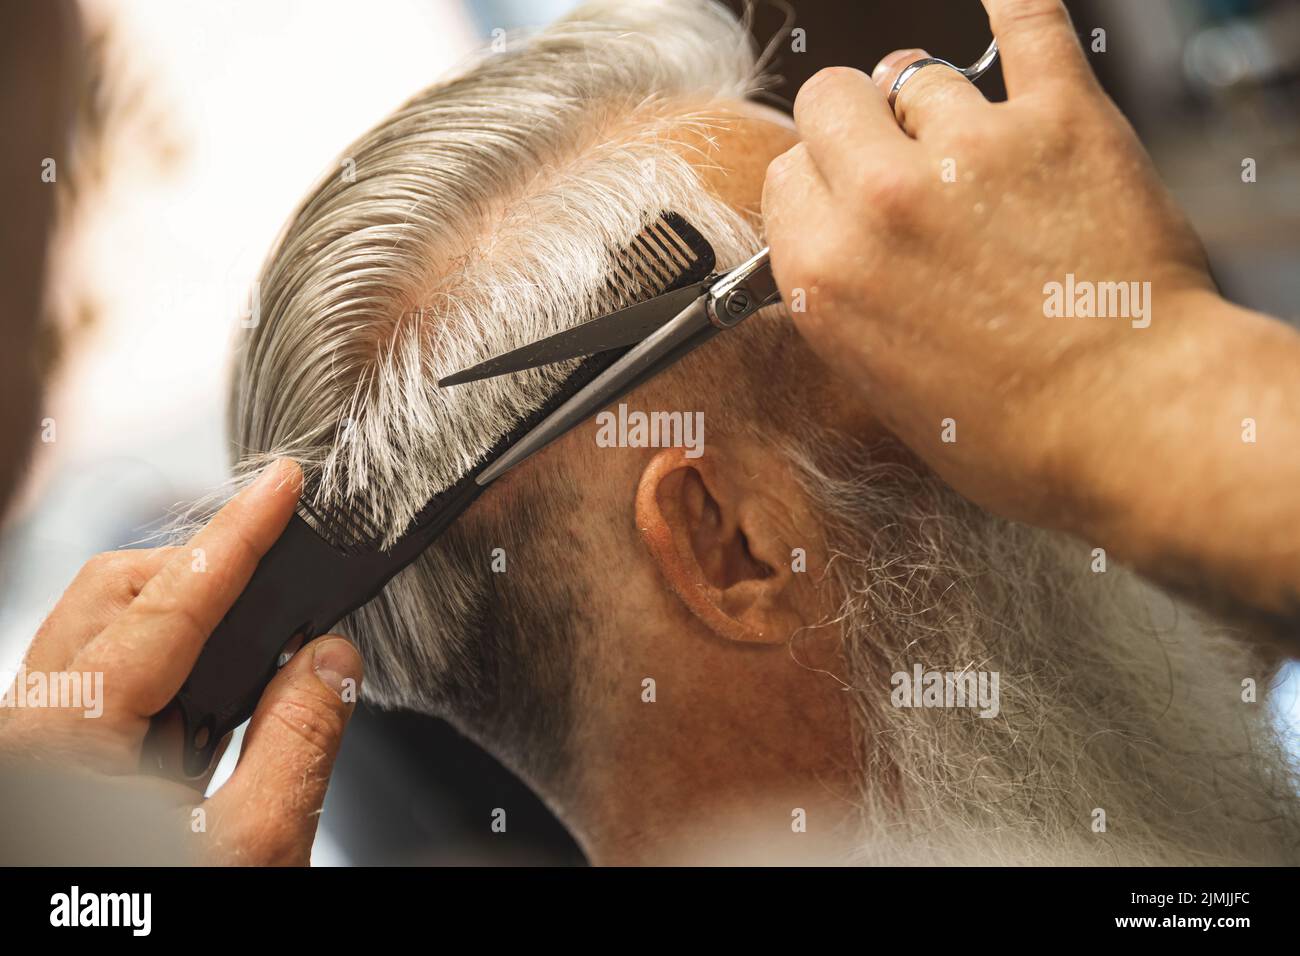 Hairdresser making stylish haircut for old man Stock Photo